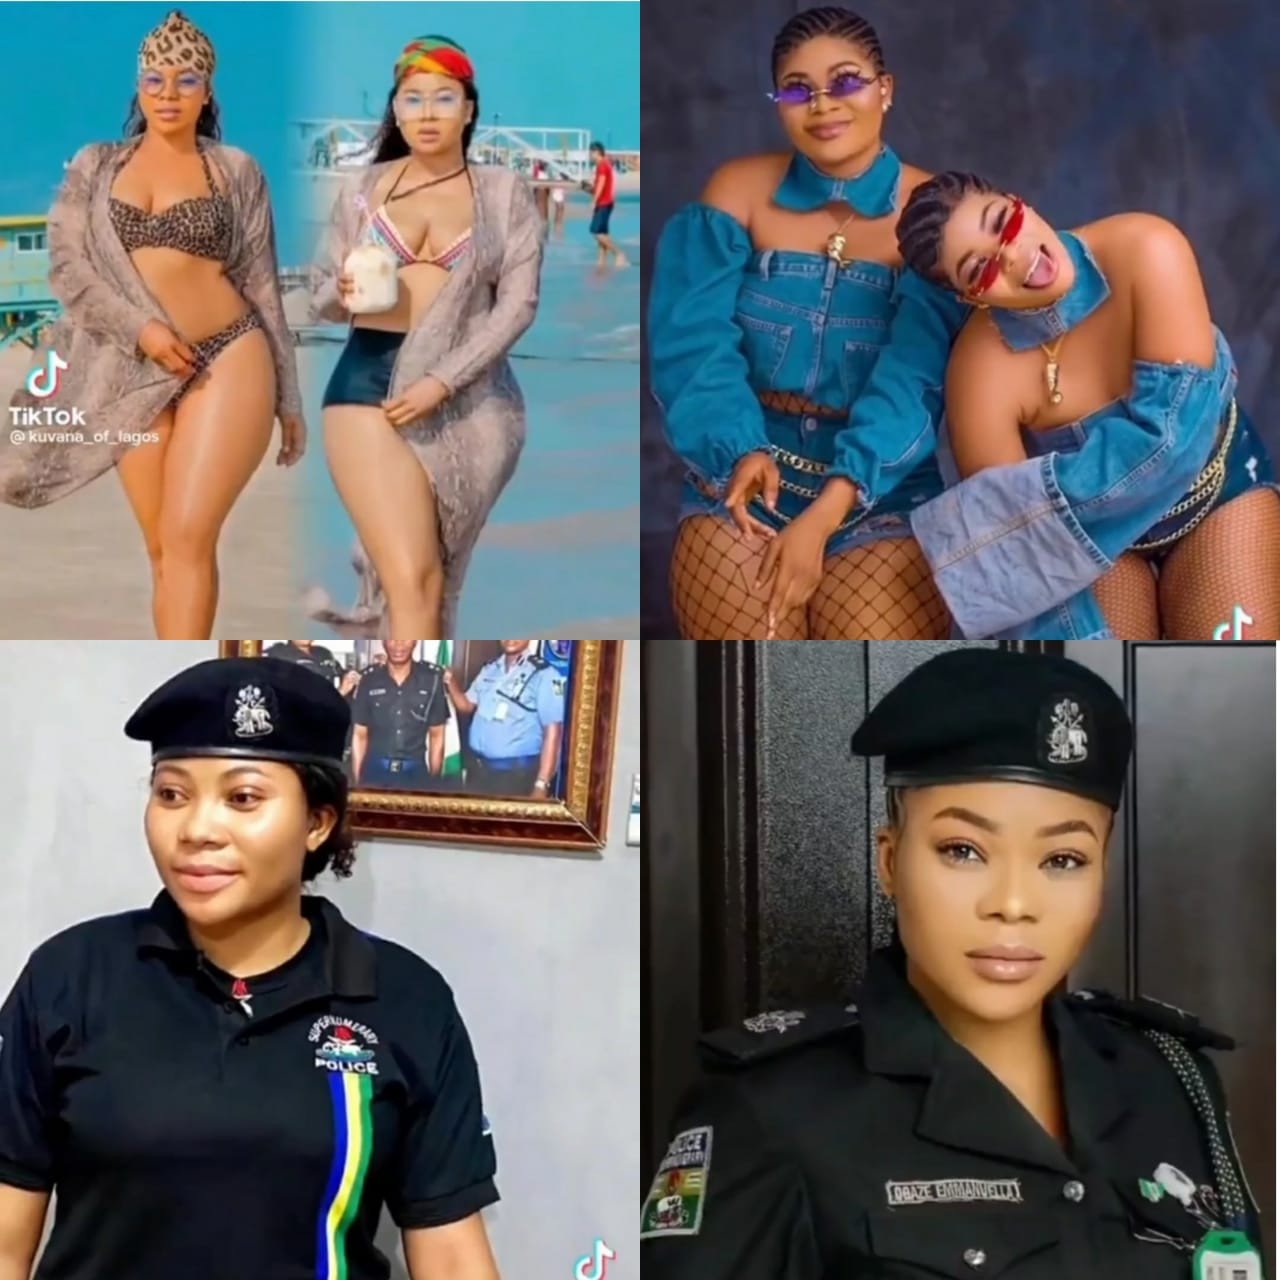 sexy police officers